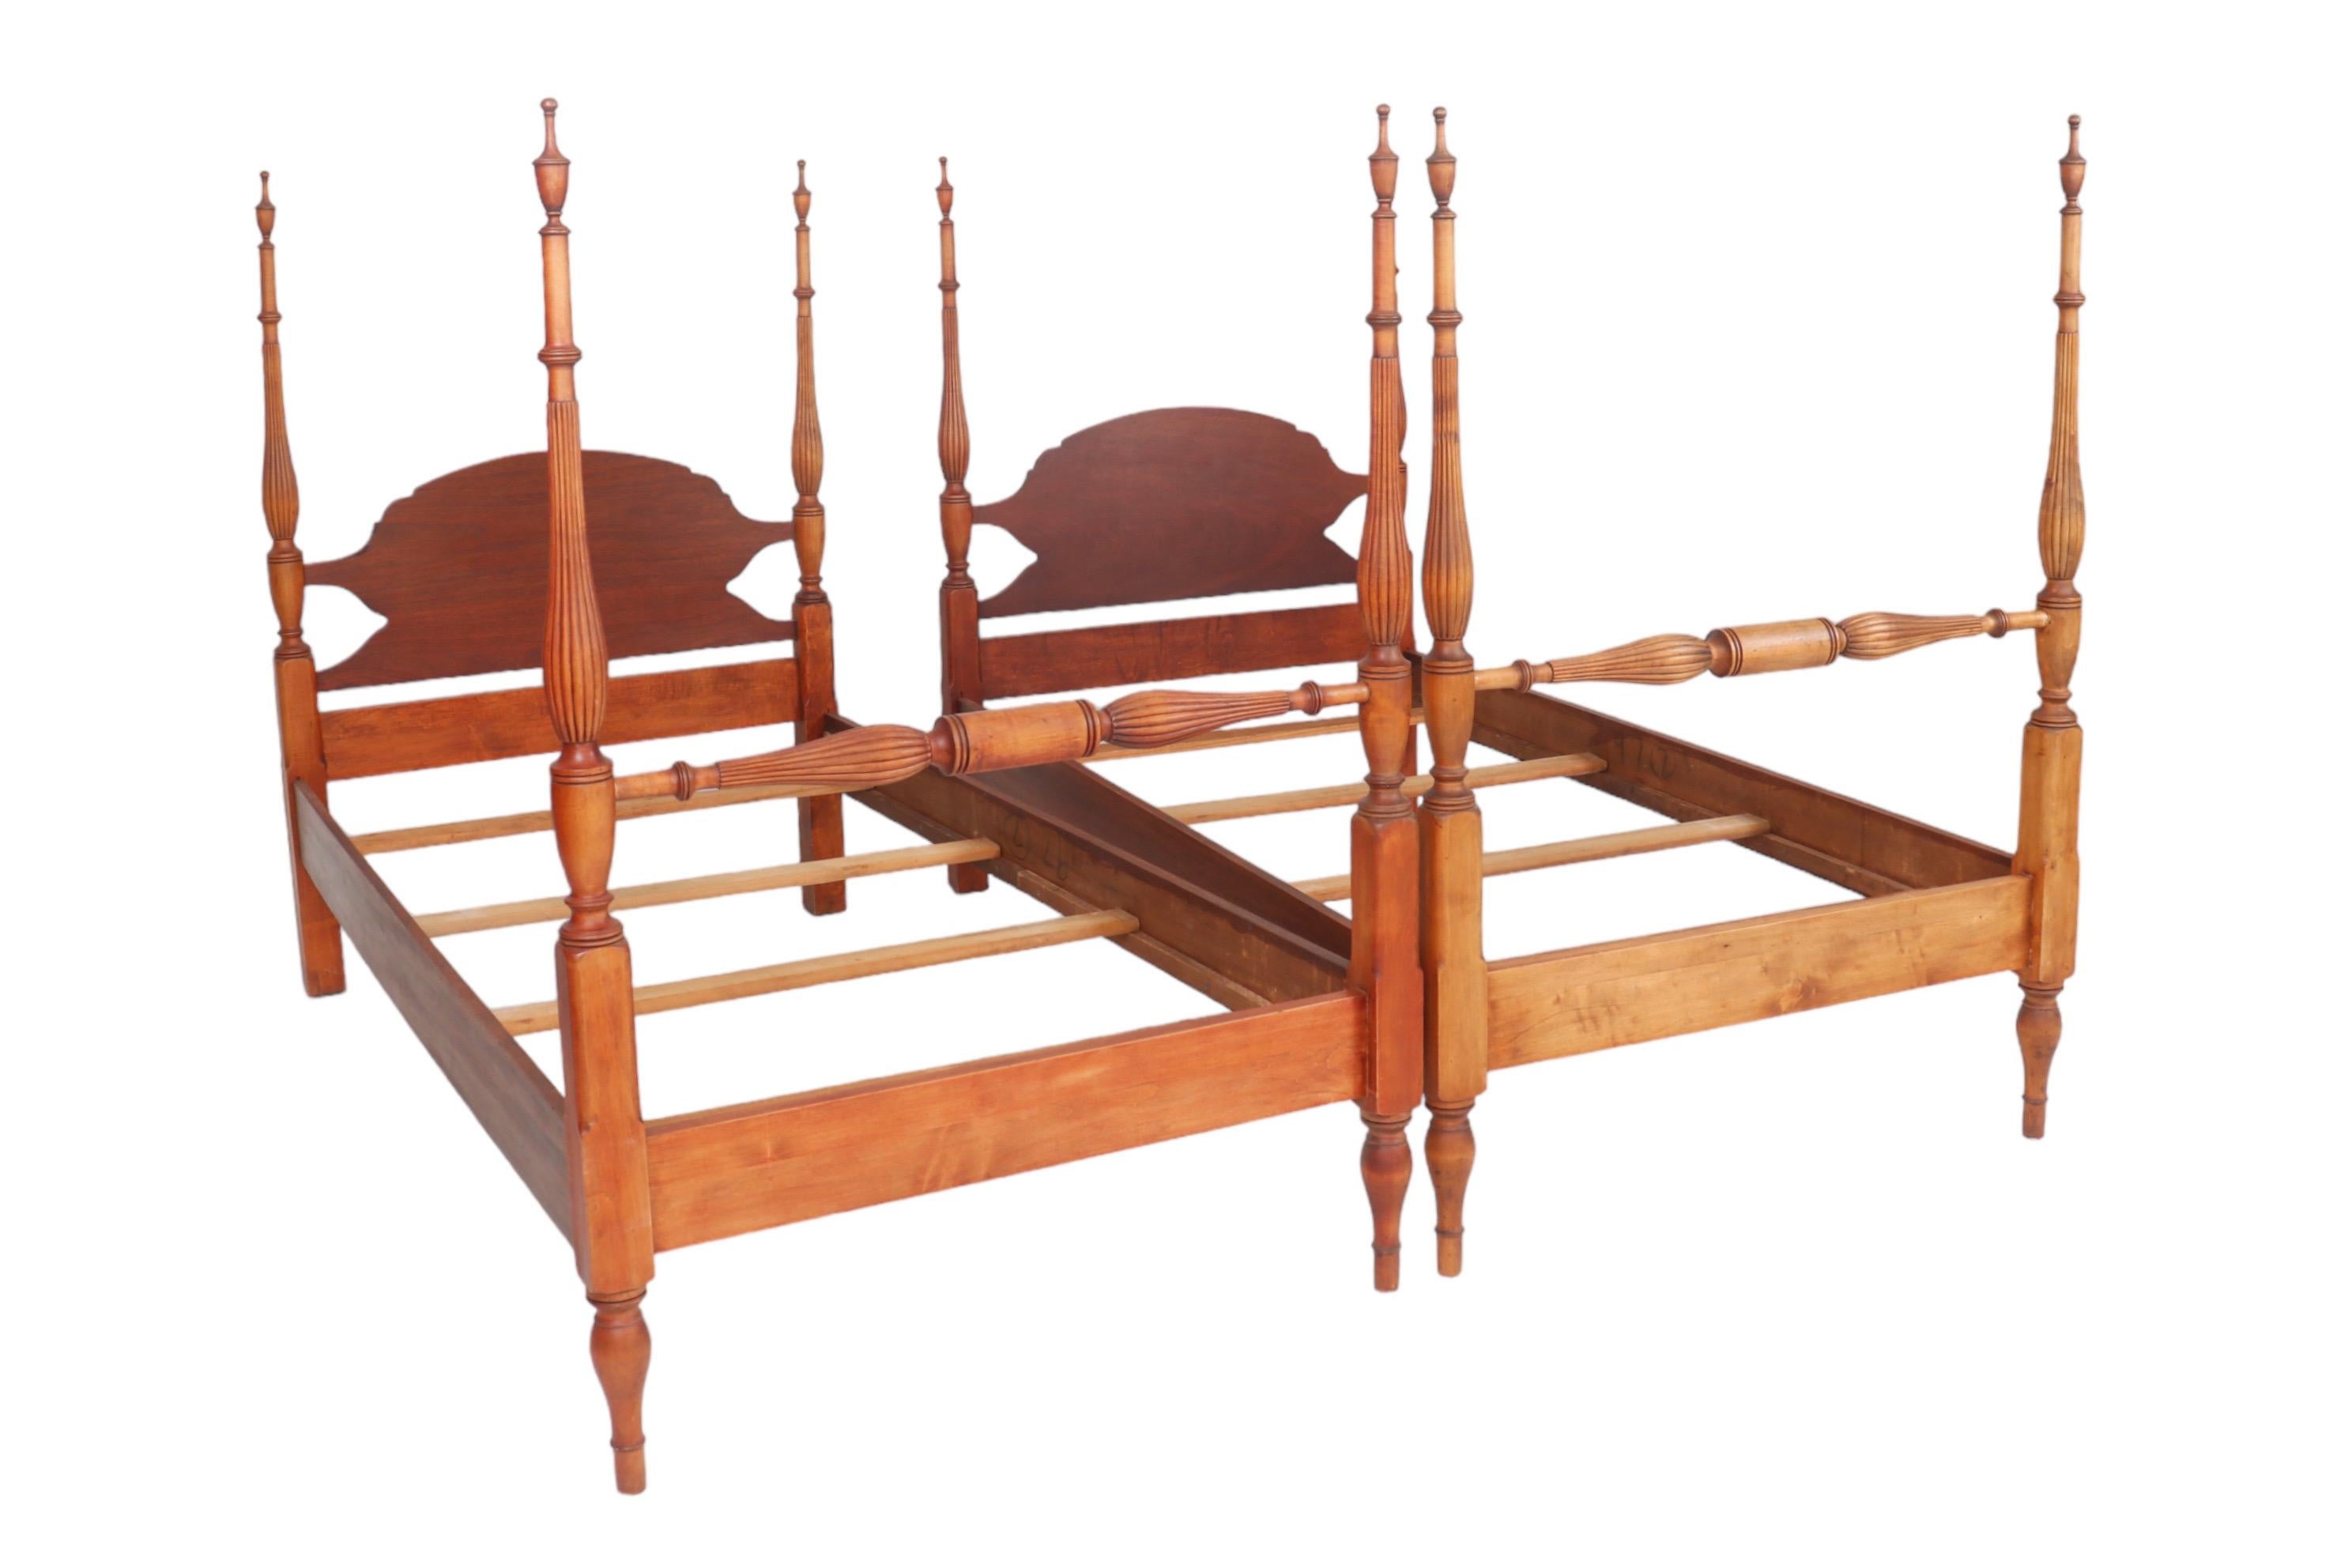 A pair of colonial style four poster twin beds made of mahogany. Each bed frame has four turned and reeded posts topped with urn finials and finished with turned arrow feet. Top posts are connected with carved oval headboards and the foot posts are